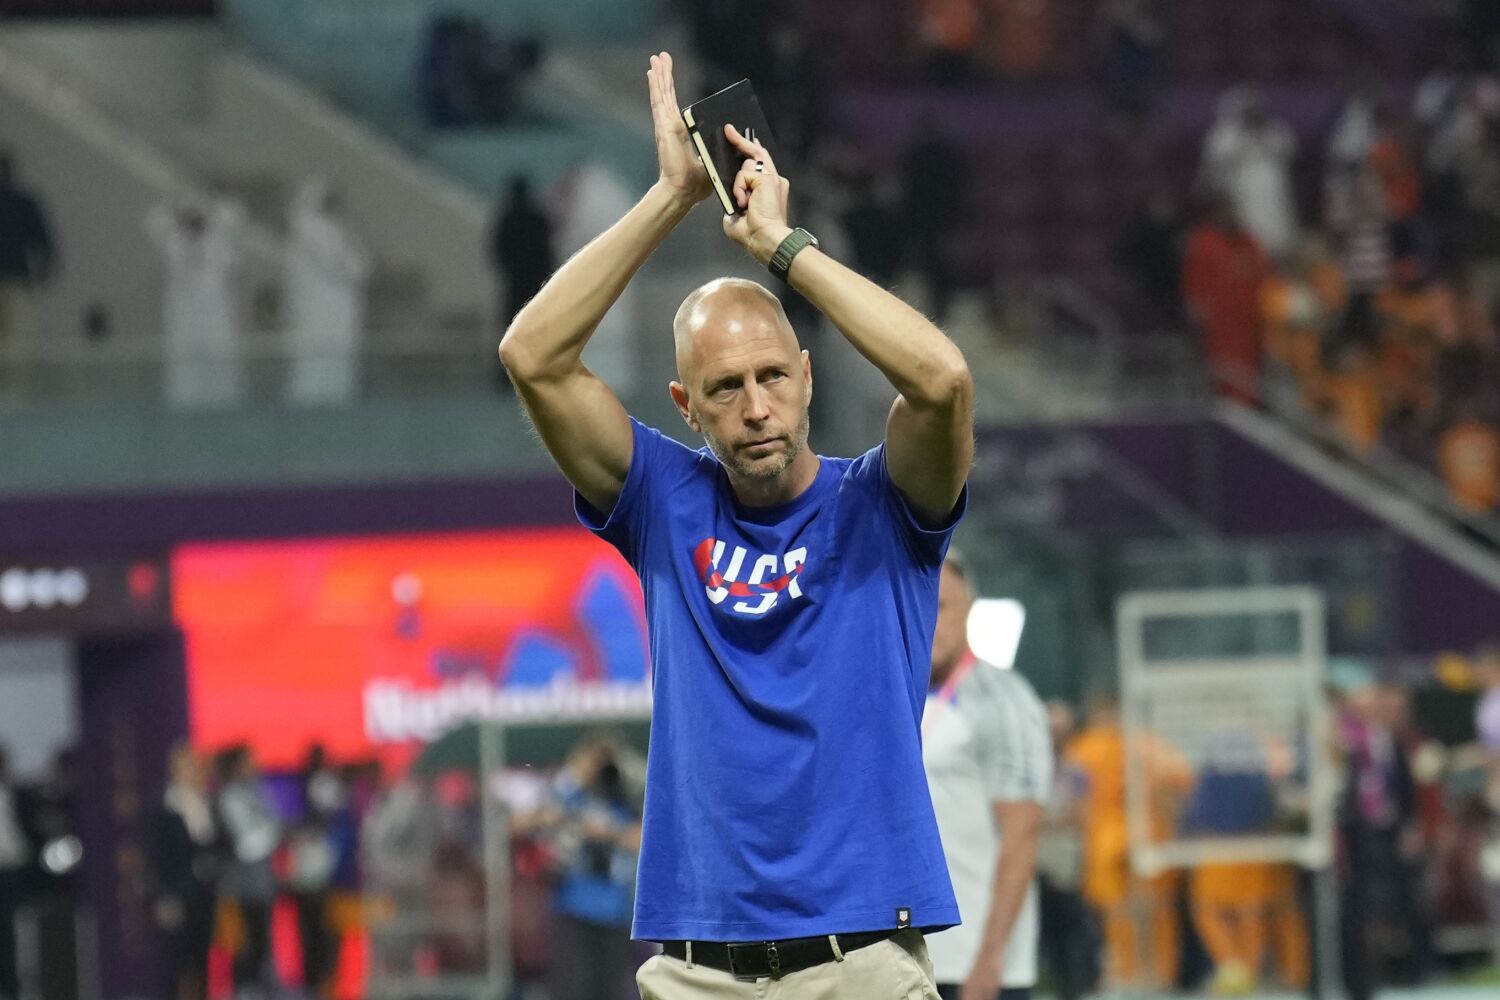 Commentary: U.S. Soccer's decision to bring back Gregg Berhalter is the right move